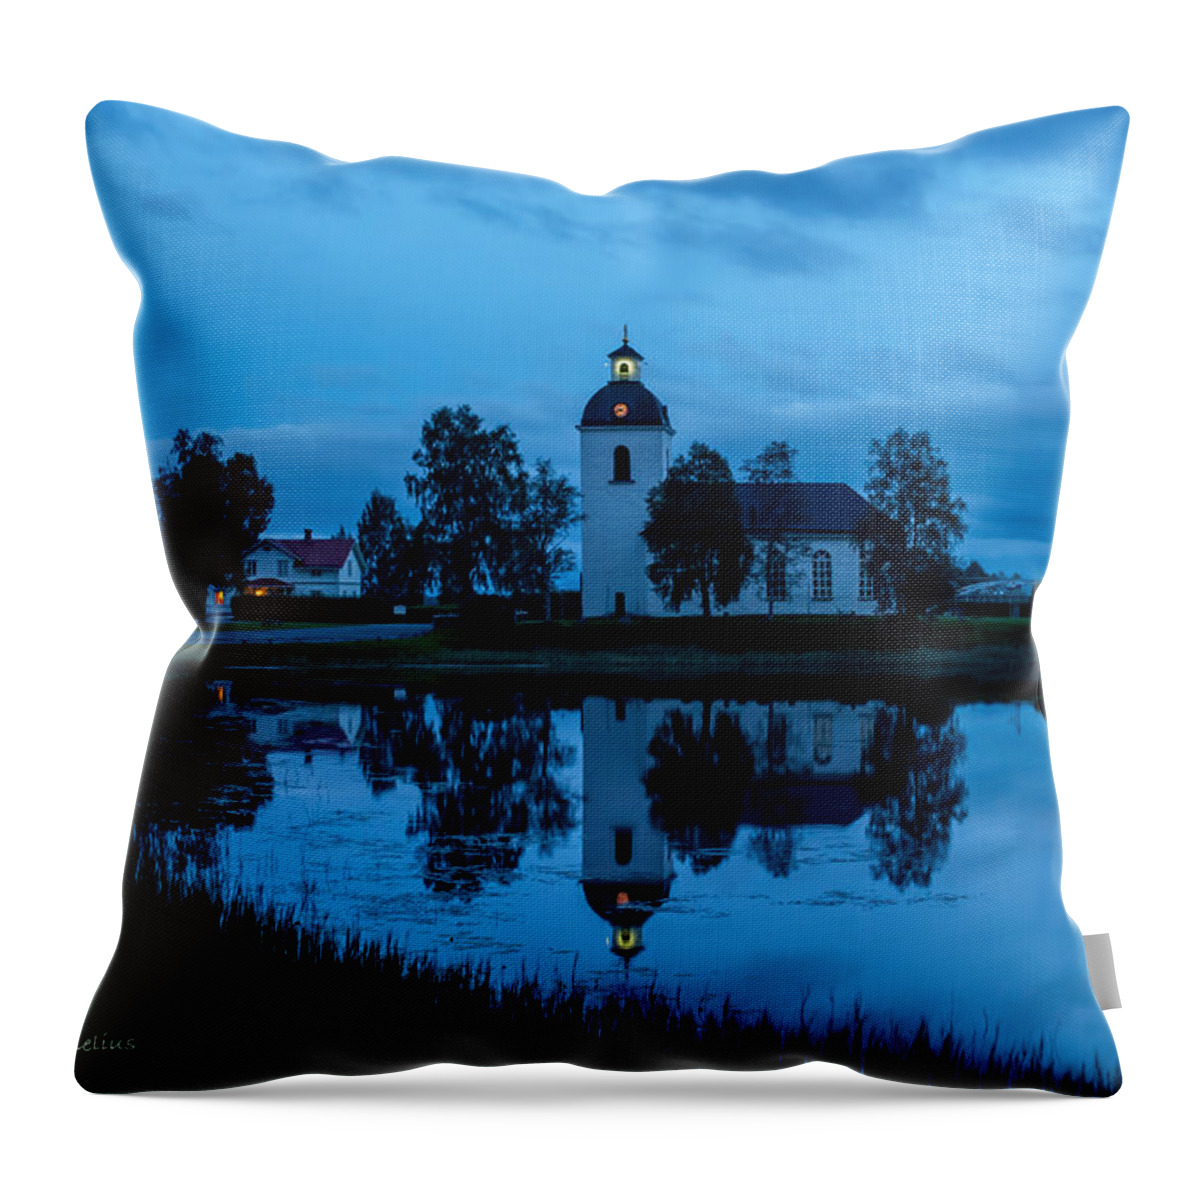 Blue Hour Throw Pillow featuring the photograph Blue Hour by Torbjorn Swenelius